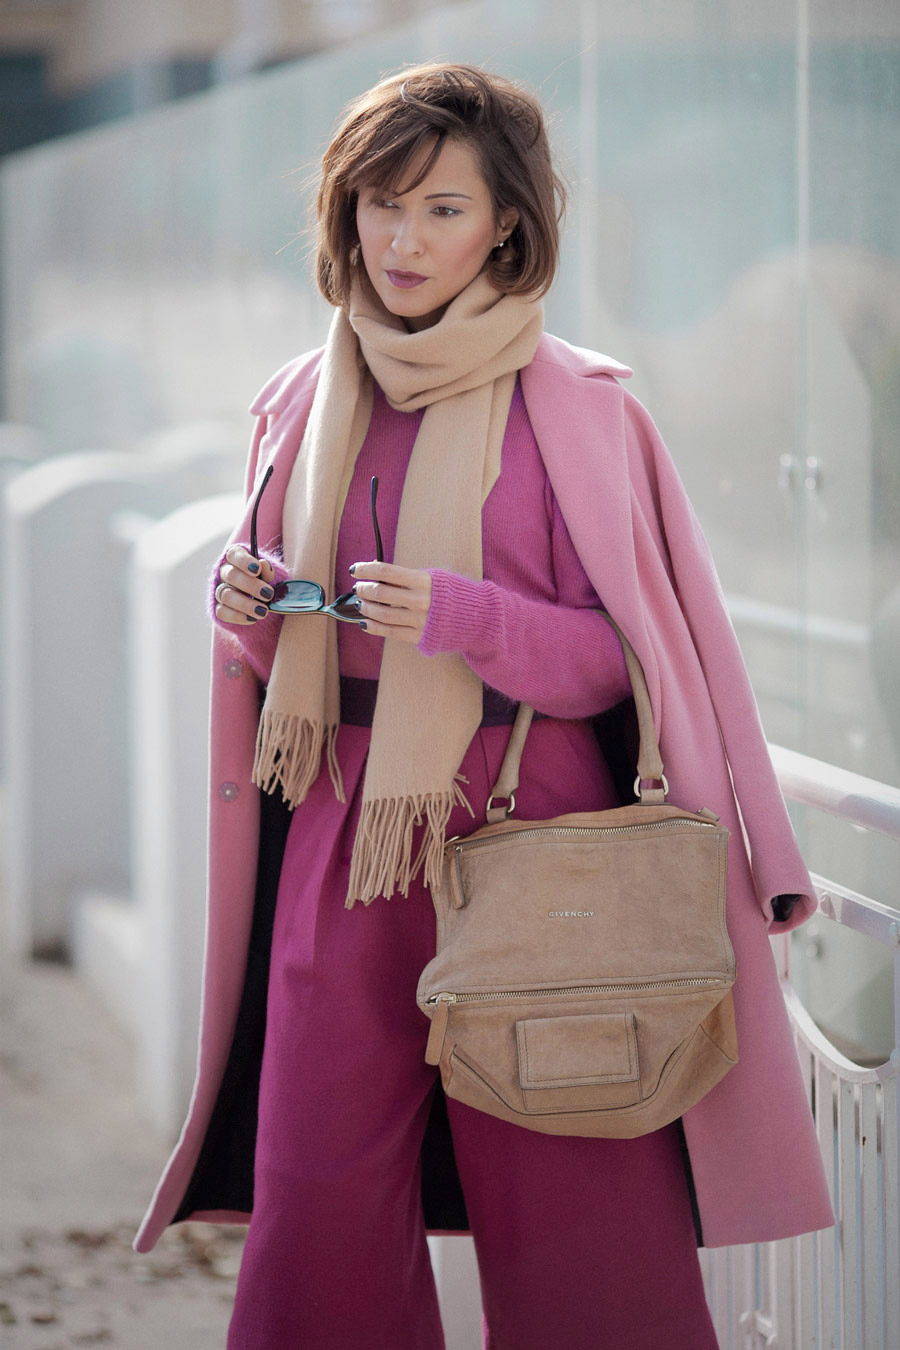 total pink, givenchy pandora bag, pink coat outfit, fall outfit ideas, autumn outfits, Ellena Galant, 